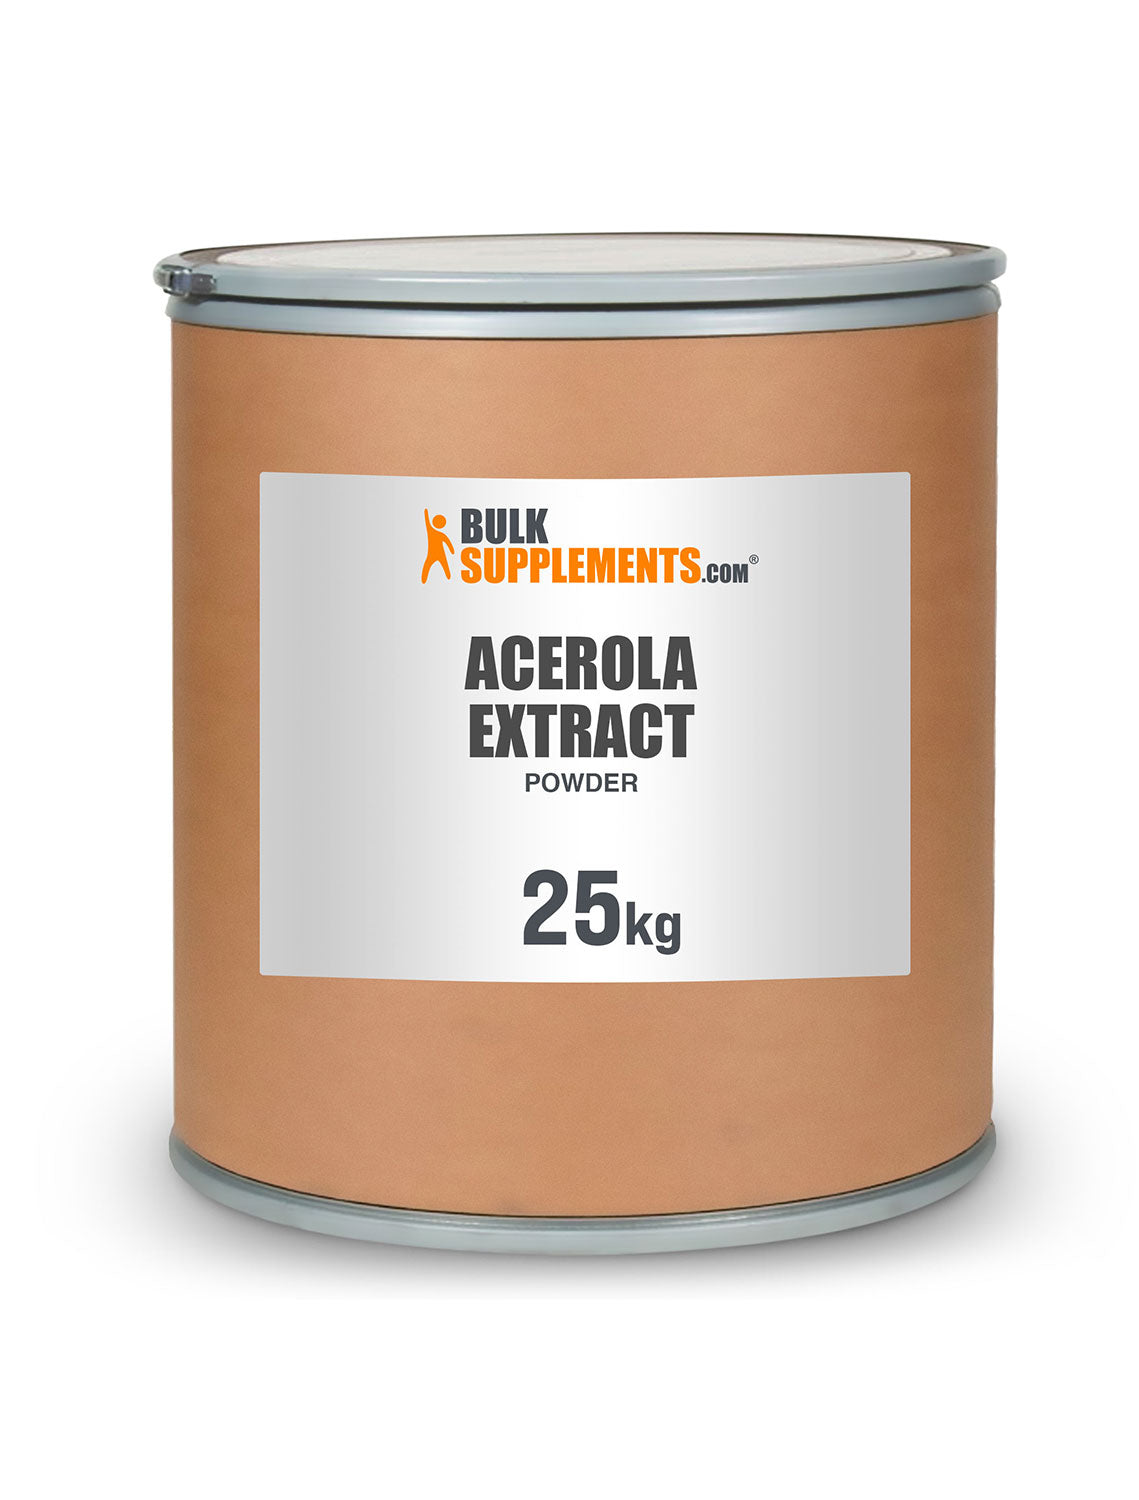 Acerola Extract Powder 25kg Can